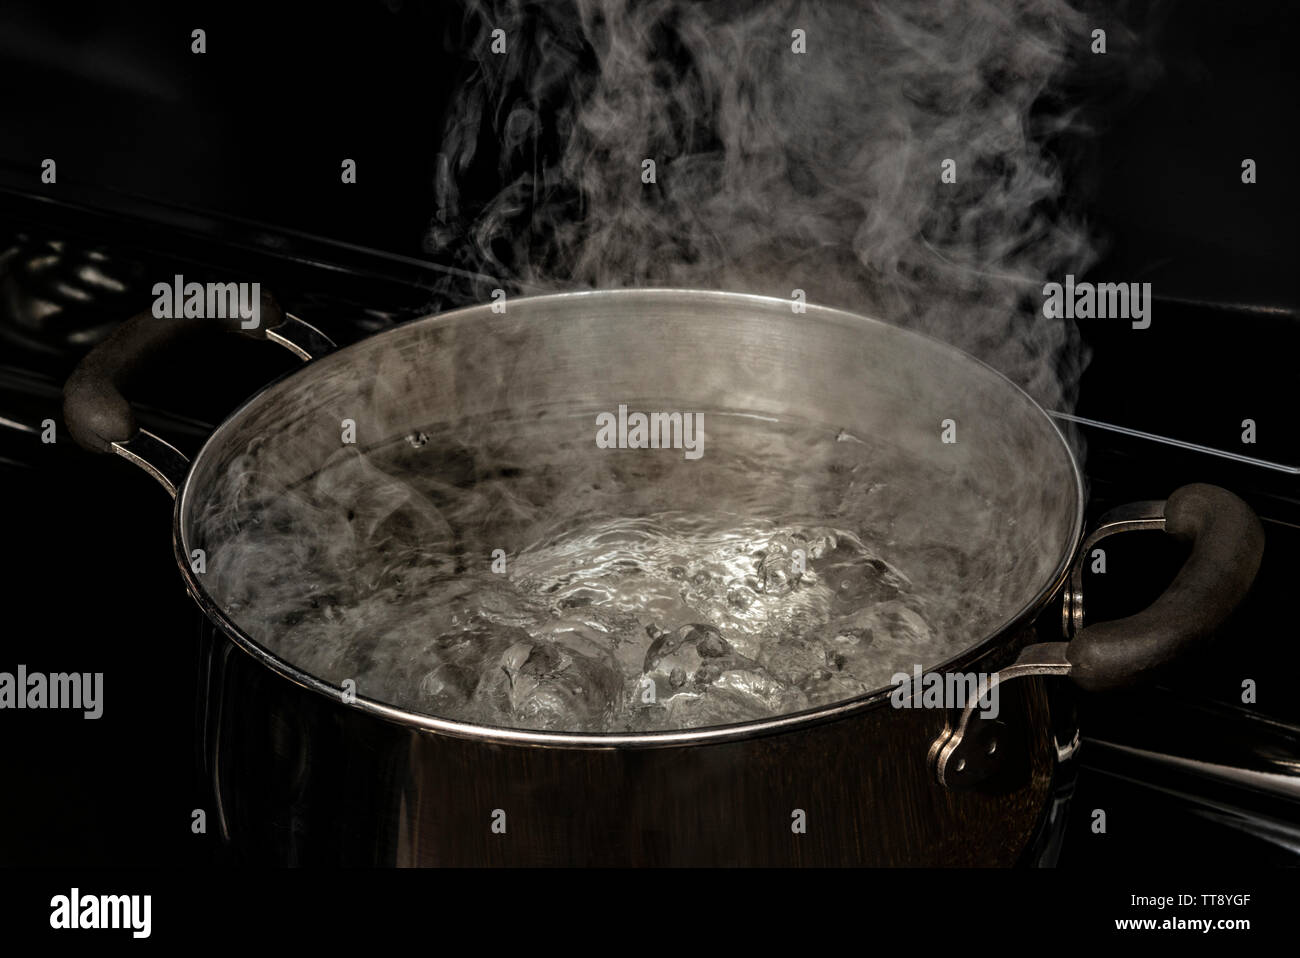 Horizontal shot of boiling water in a Dutch oven on a stovetop. Stock Photo